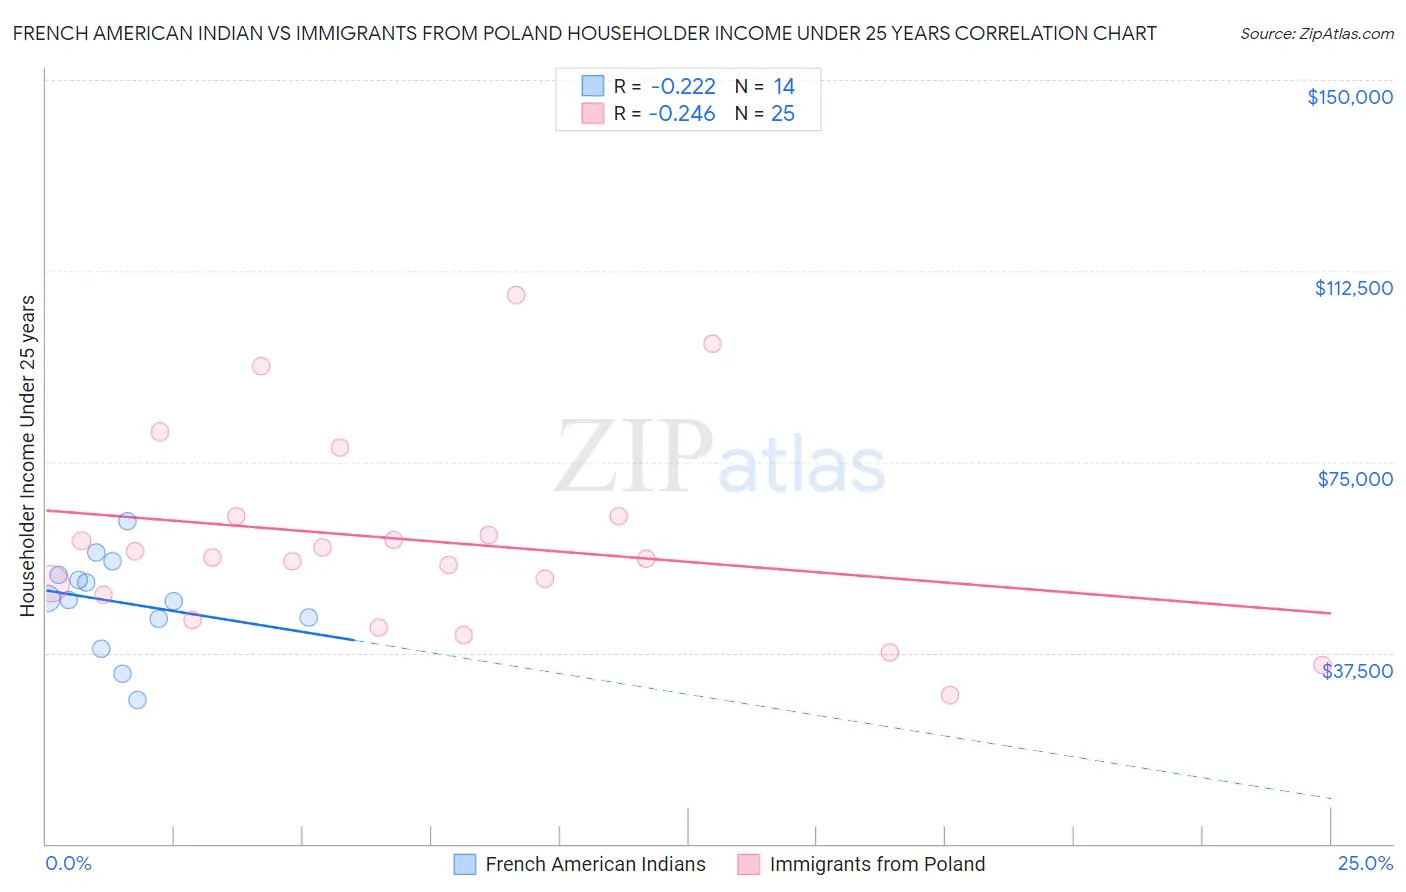 French American Indian vs Immigrants from Poland Householder Income Under 25 years